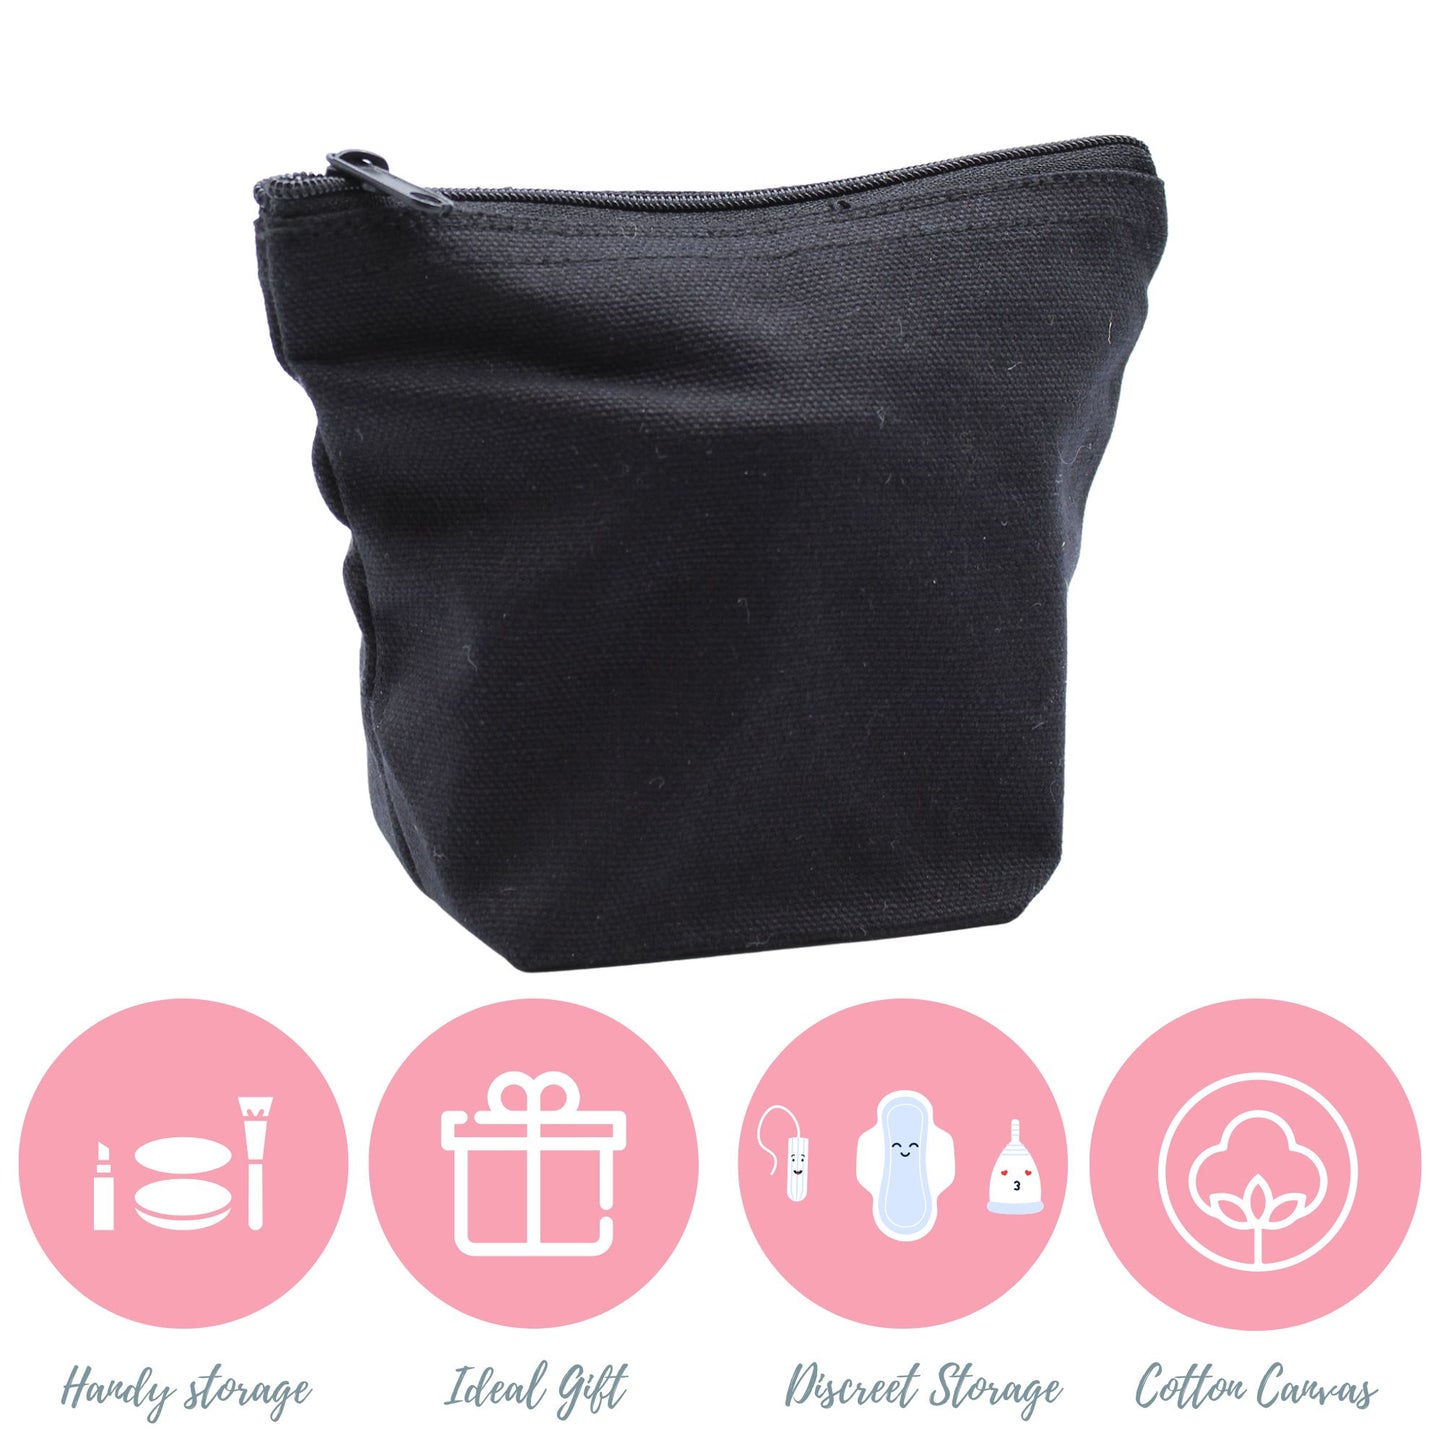 London Carousel Sanitary Pad Storage Bag: Period Bag with Flushable Wipes & Disposal Bags